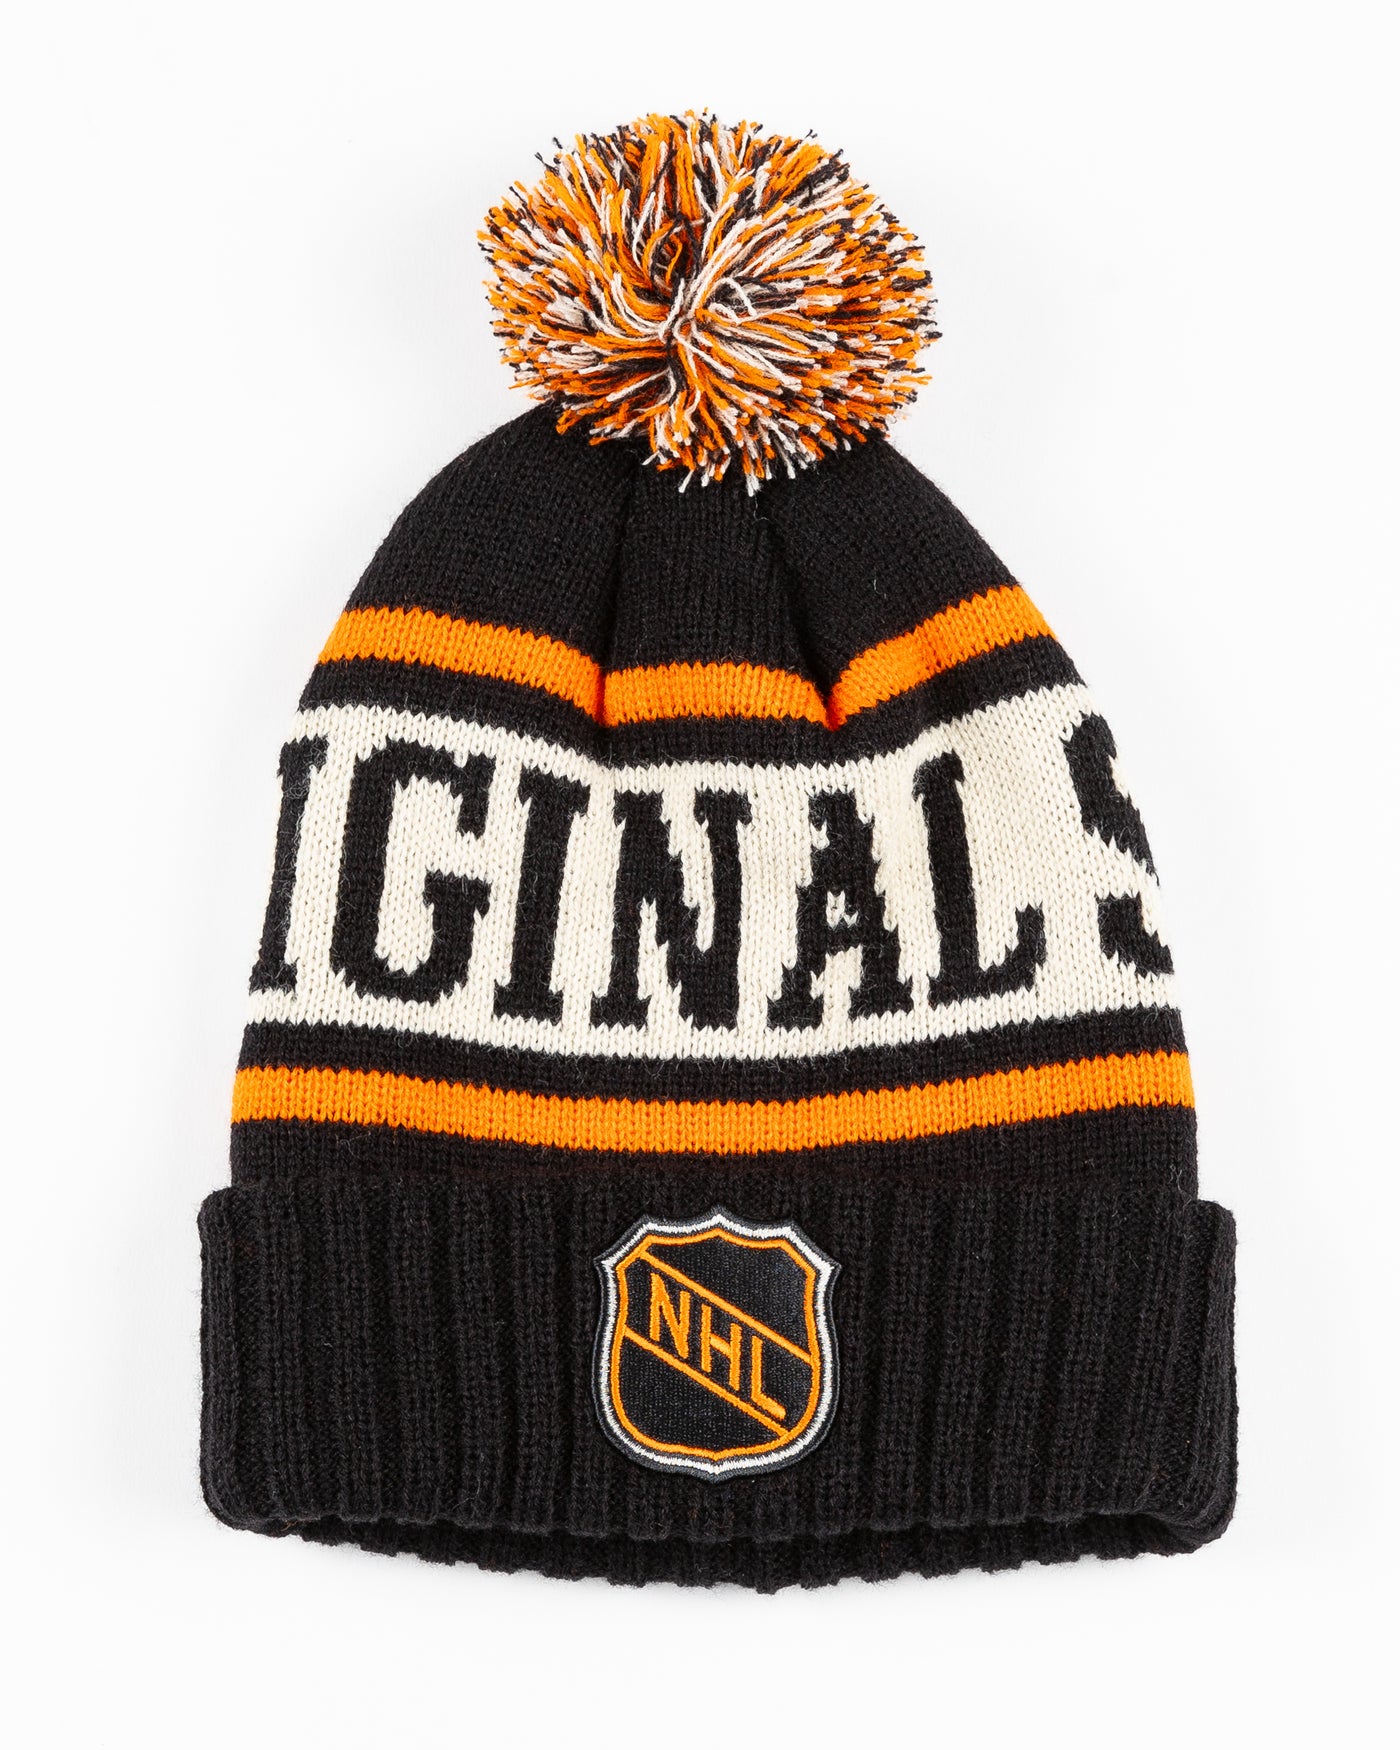 black, beige and orange knit beanie with pom with NHL patch stitched on front cuff - front lay flat